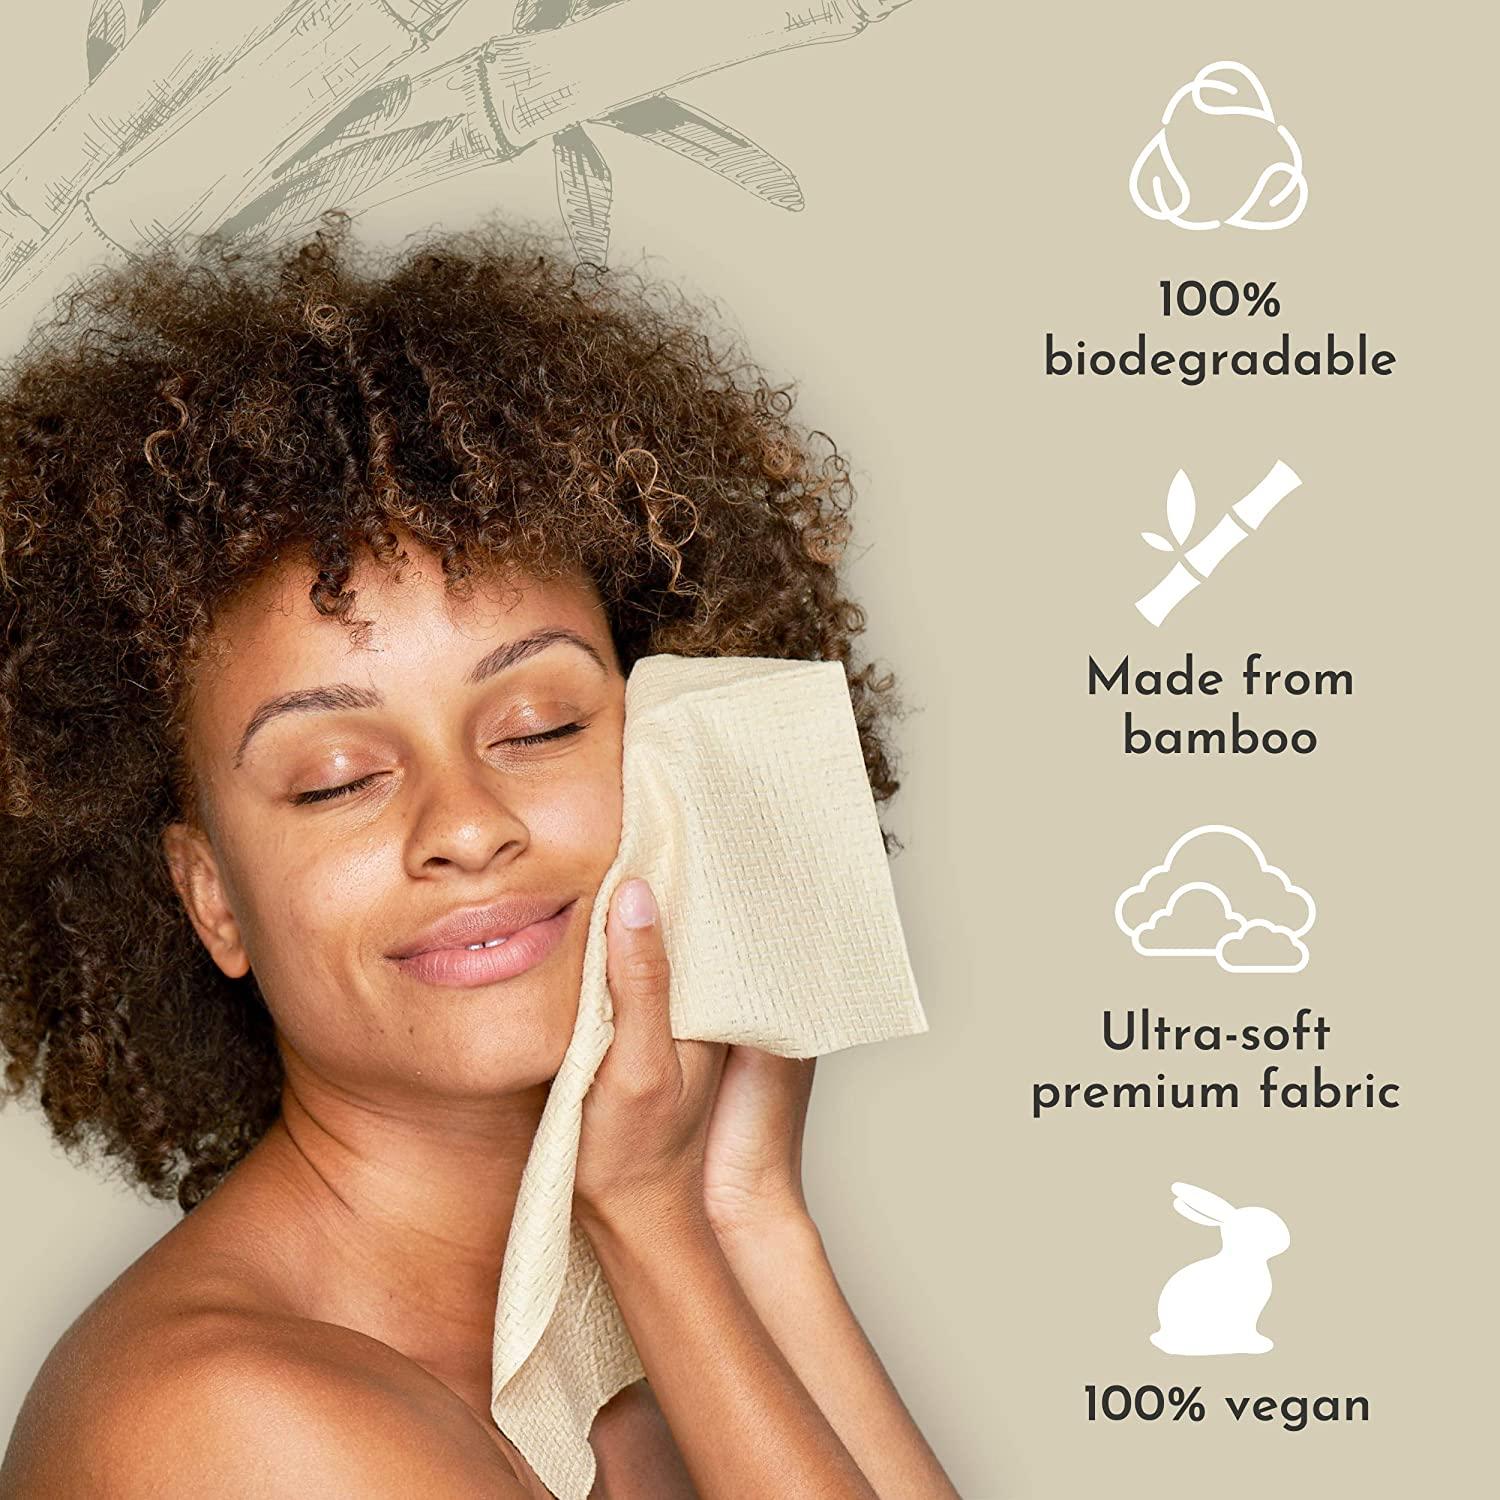 Clean Skin Club Clean Towels XL Disposable Face Wash Cloths Ultra Soft 50  CT for sale online